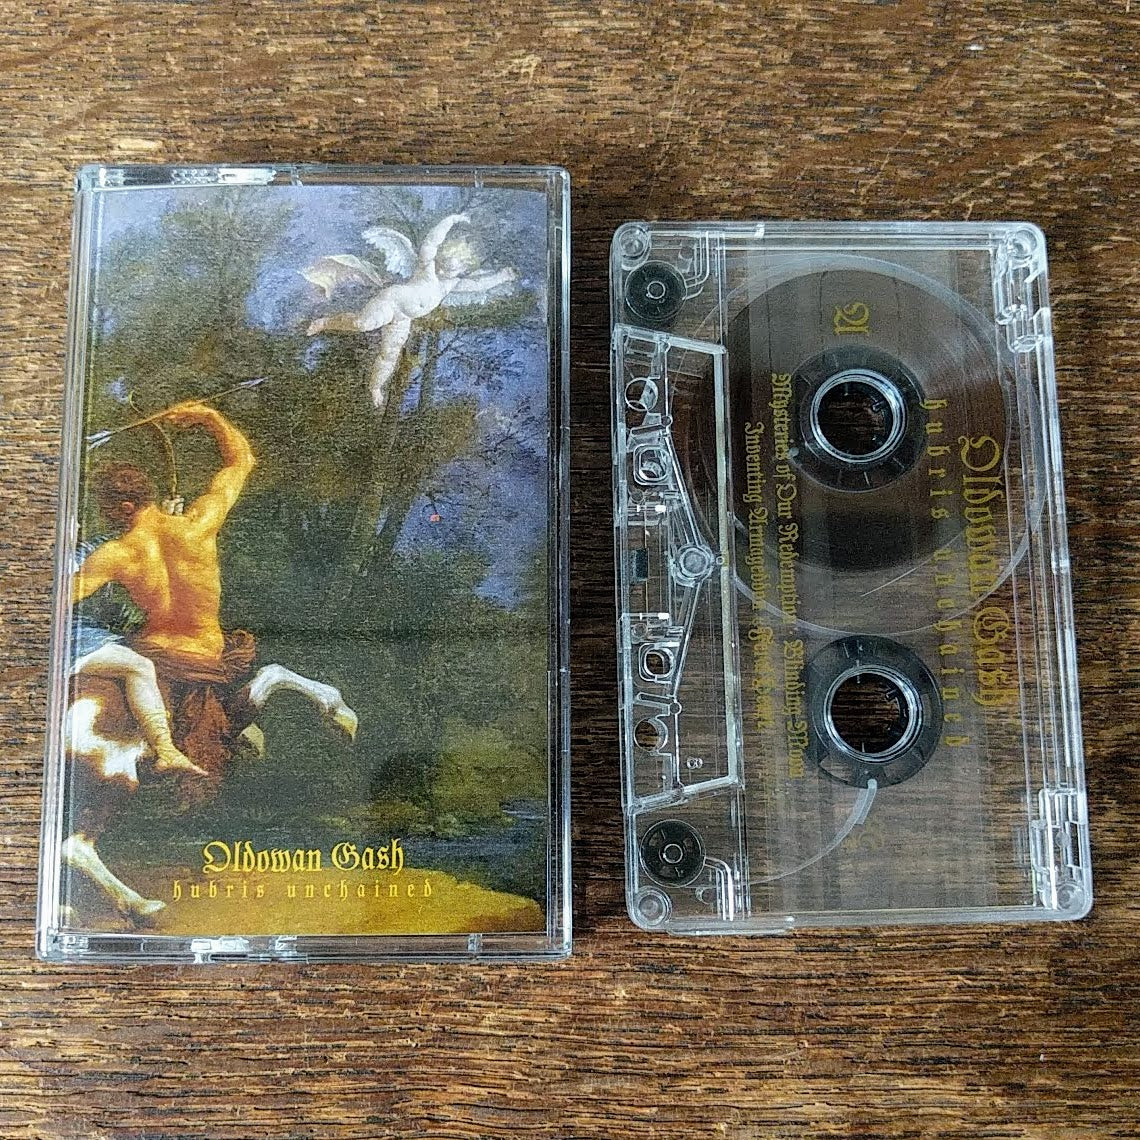 [SOLD OUT] OLDOWAN GASH "Hubris Unchained" Cassette Tape